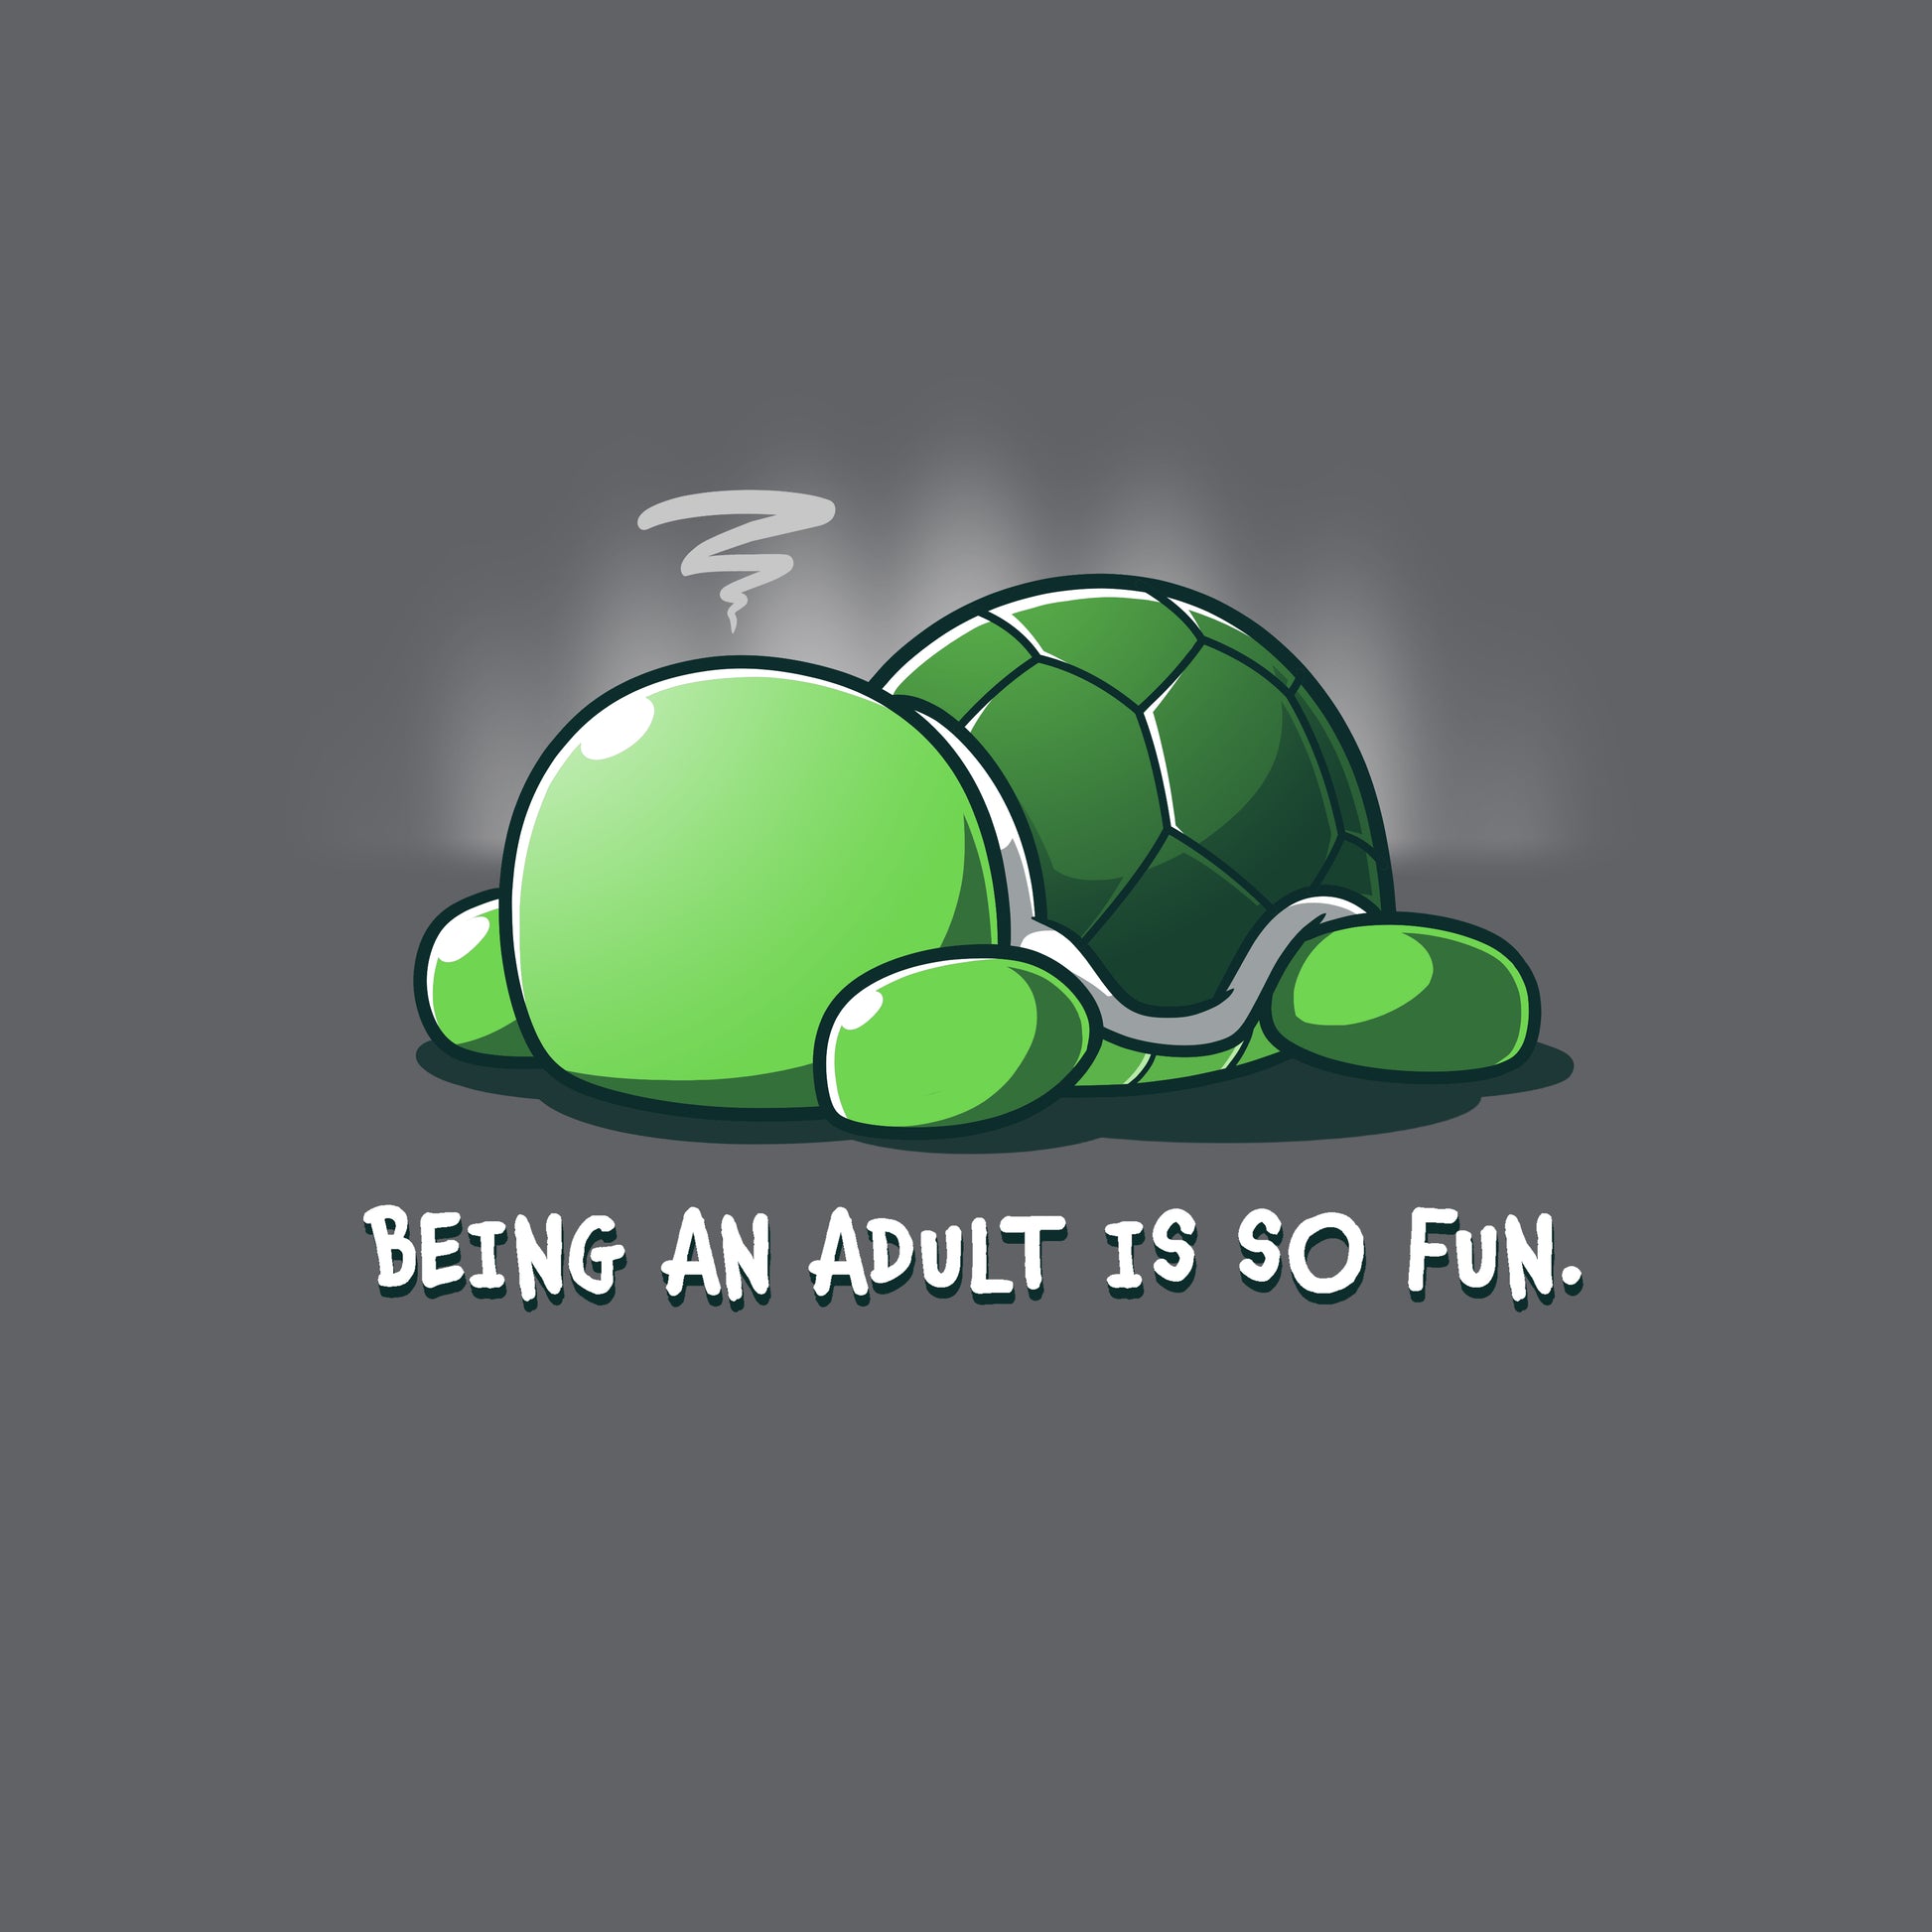 Premium Cotton T-shirt - Cartoon turtle lying face down with a stressed expression, accompanied by the text "Being an adult is so fun." Available on a super soft ringspun cotton charcoal gray tee, this monsterdigital Being An Adult Is So Fun adult humor apparel perfectly captures the trials of adulthood.